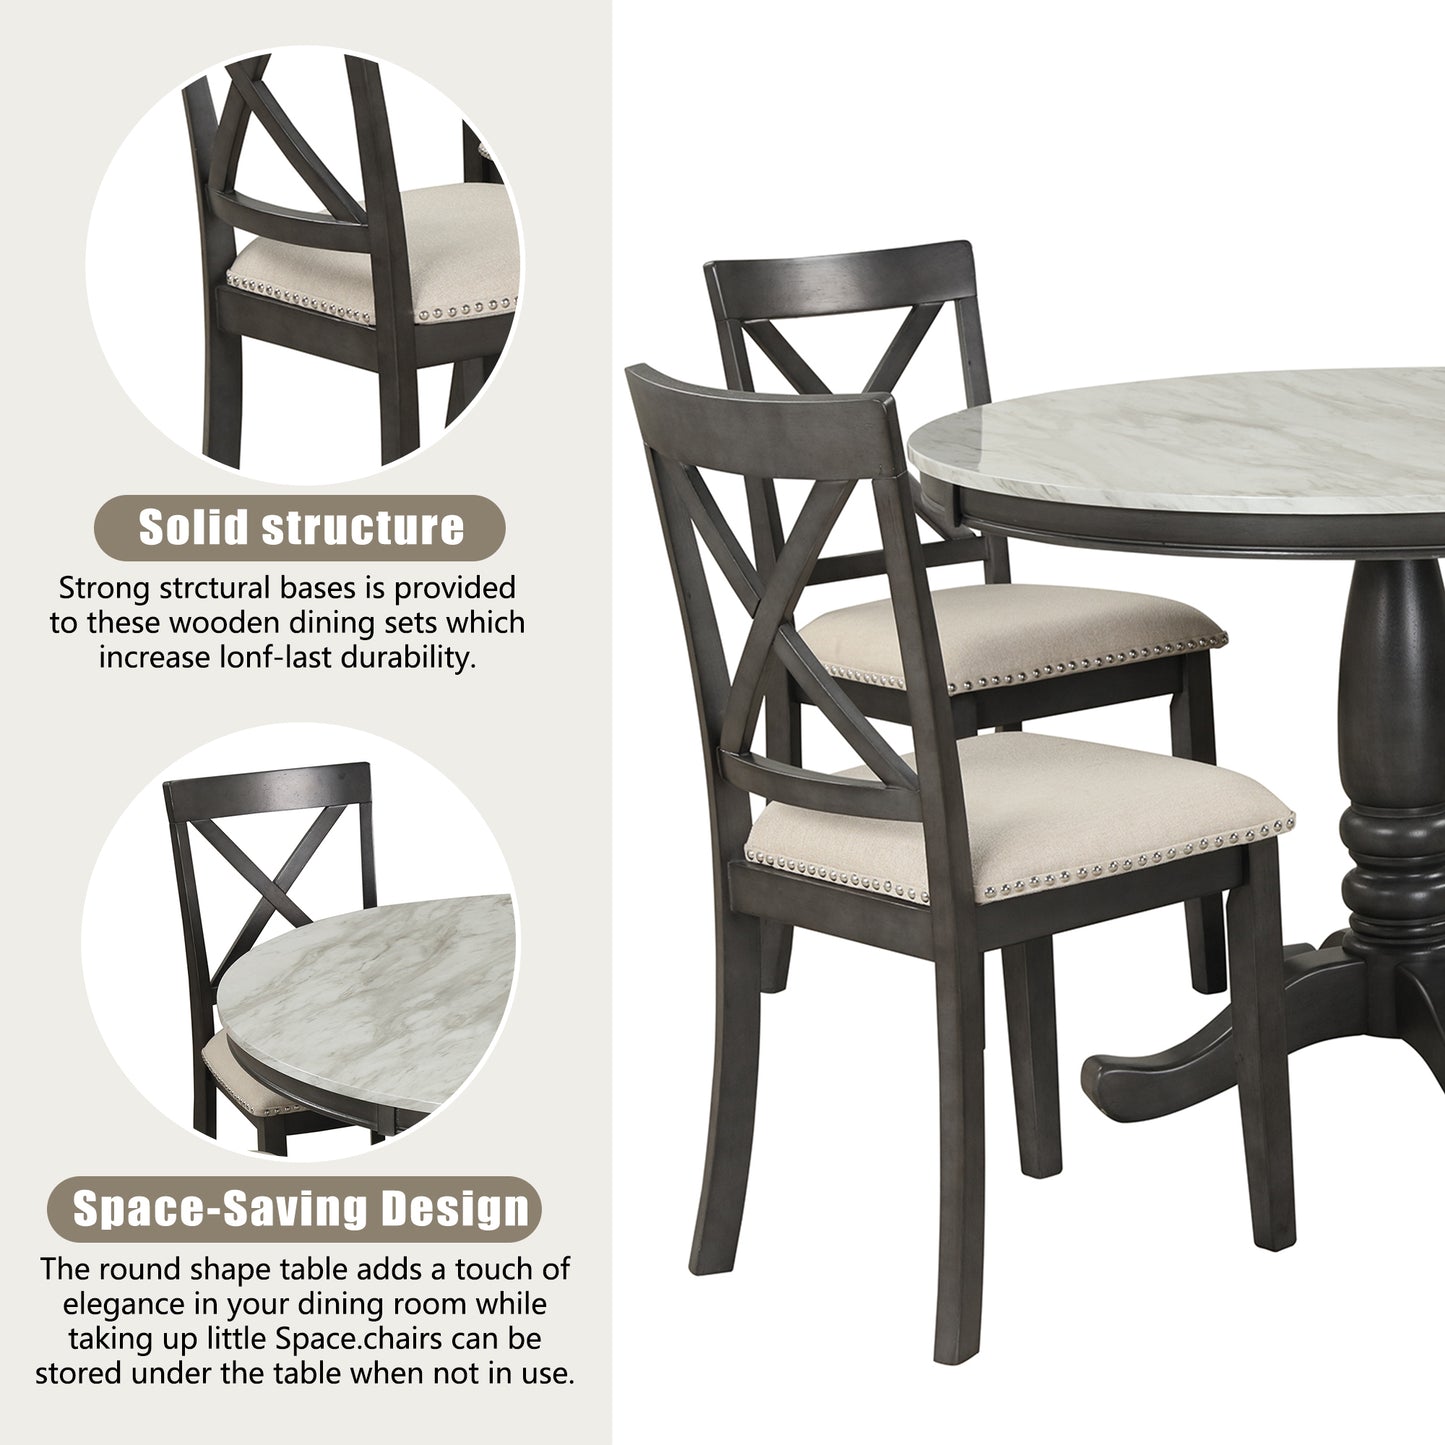 Orisfur 5 Pieces Dining Table and Chairs Set for 4 Persons